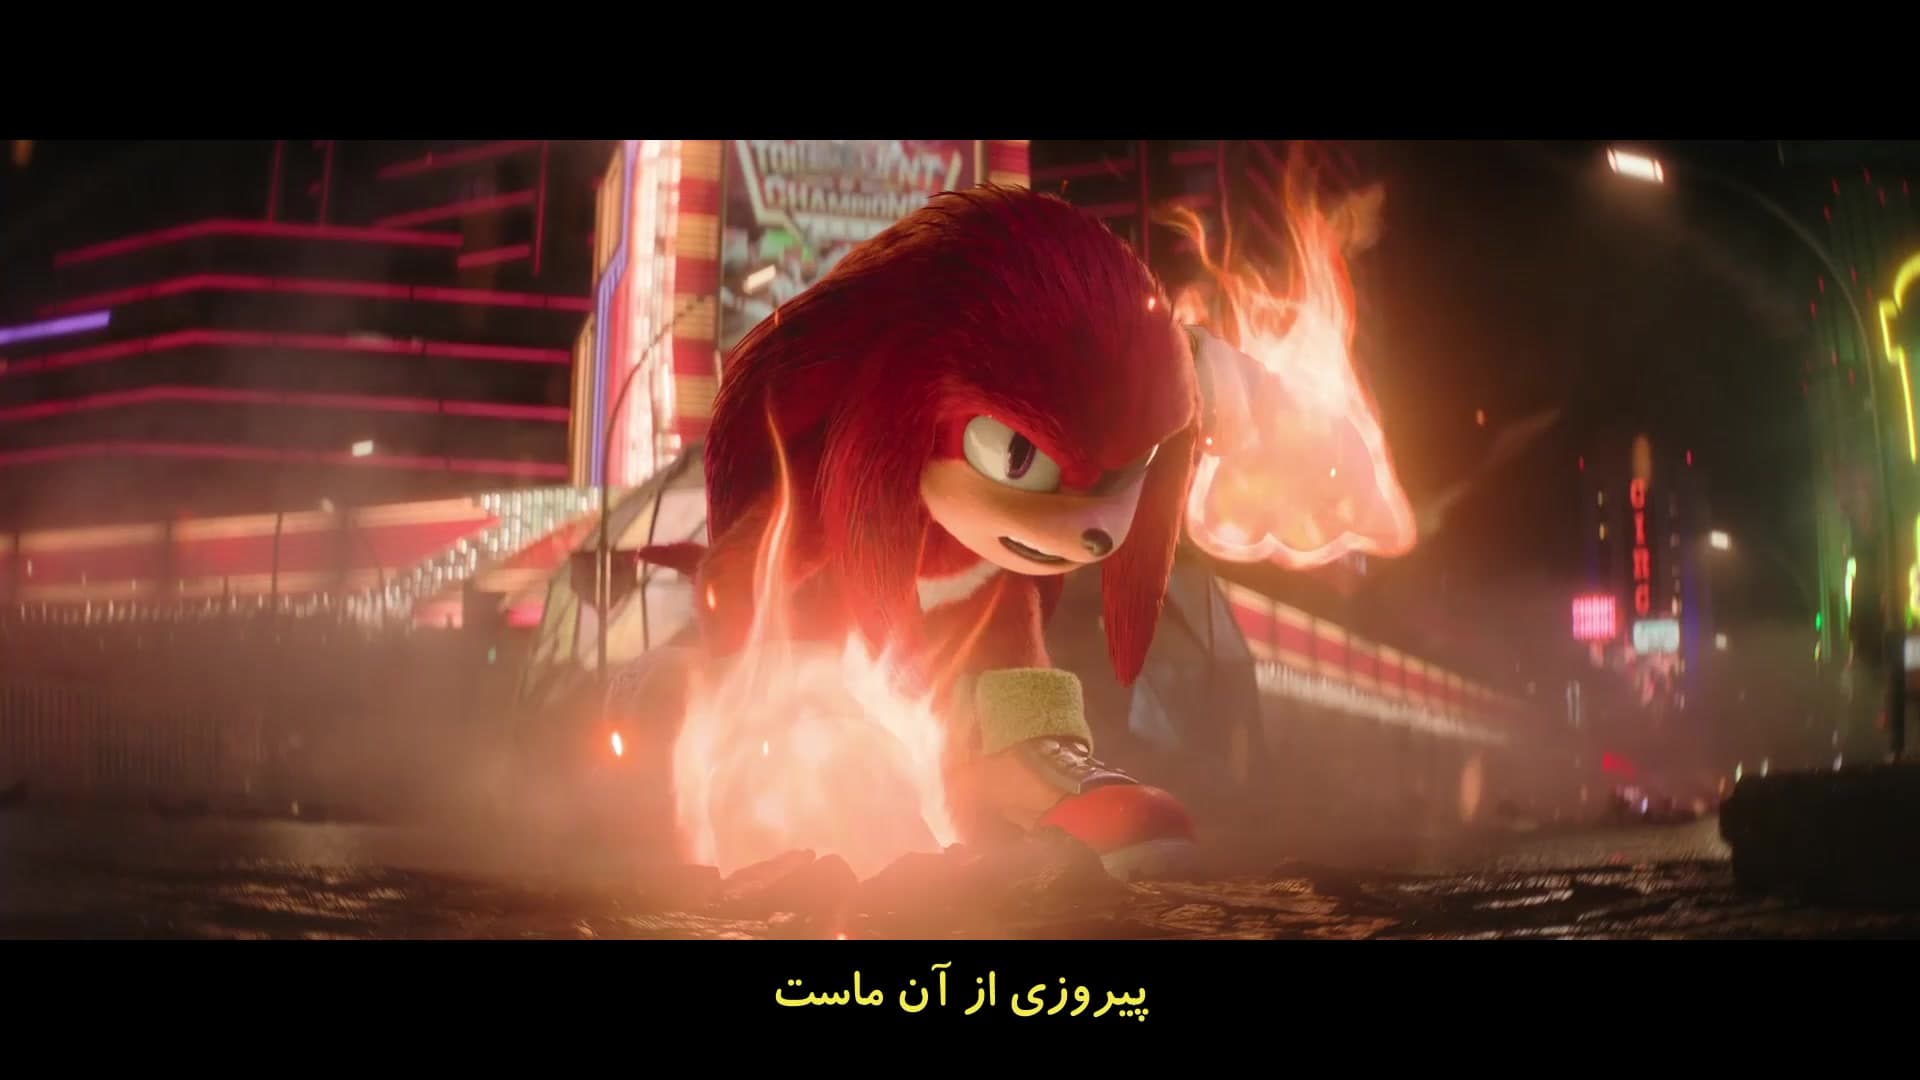 Knuckles S01E06